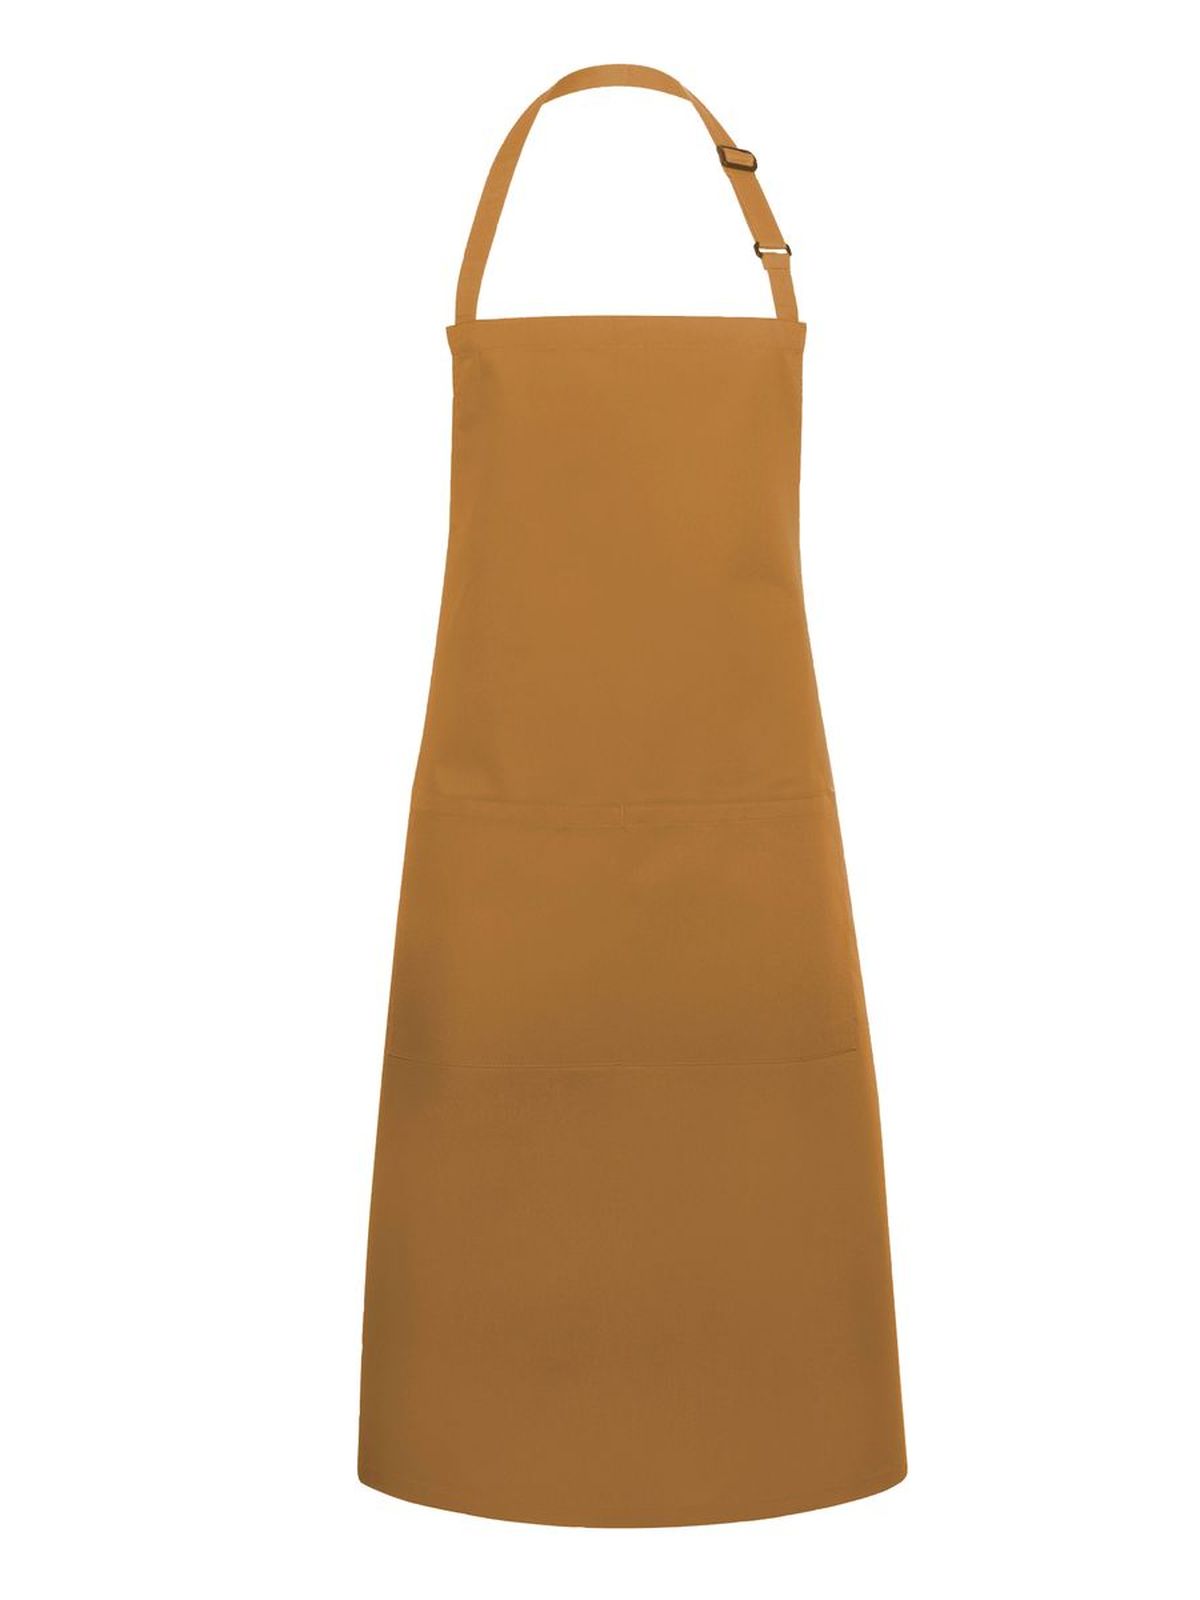 bistro-apron-basic-with-buckle-and-pocket-mustard.webp